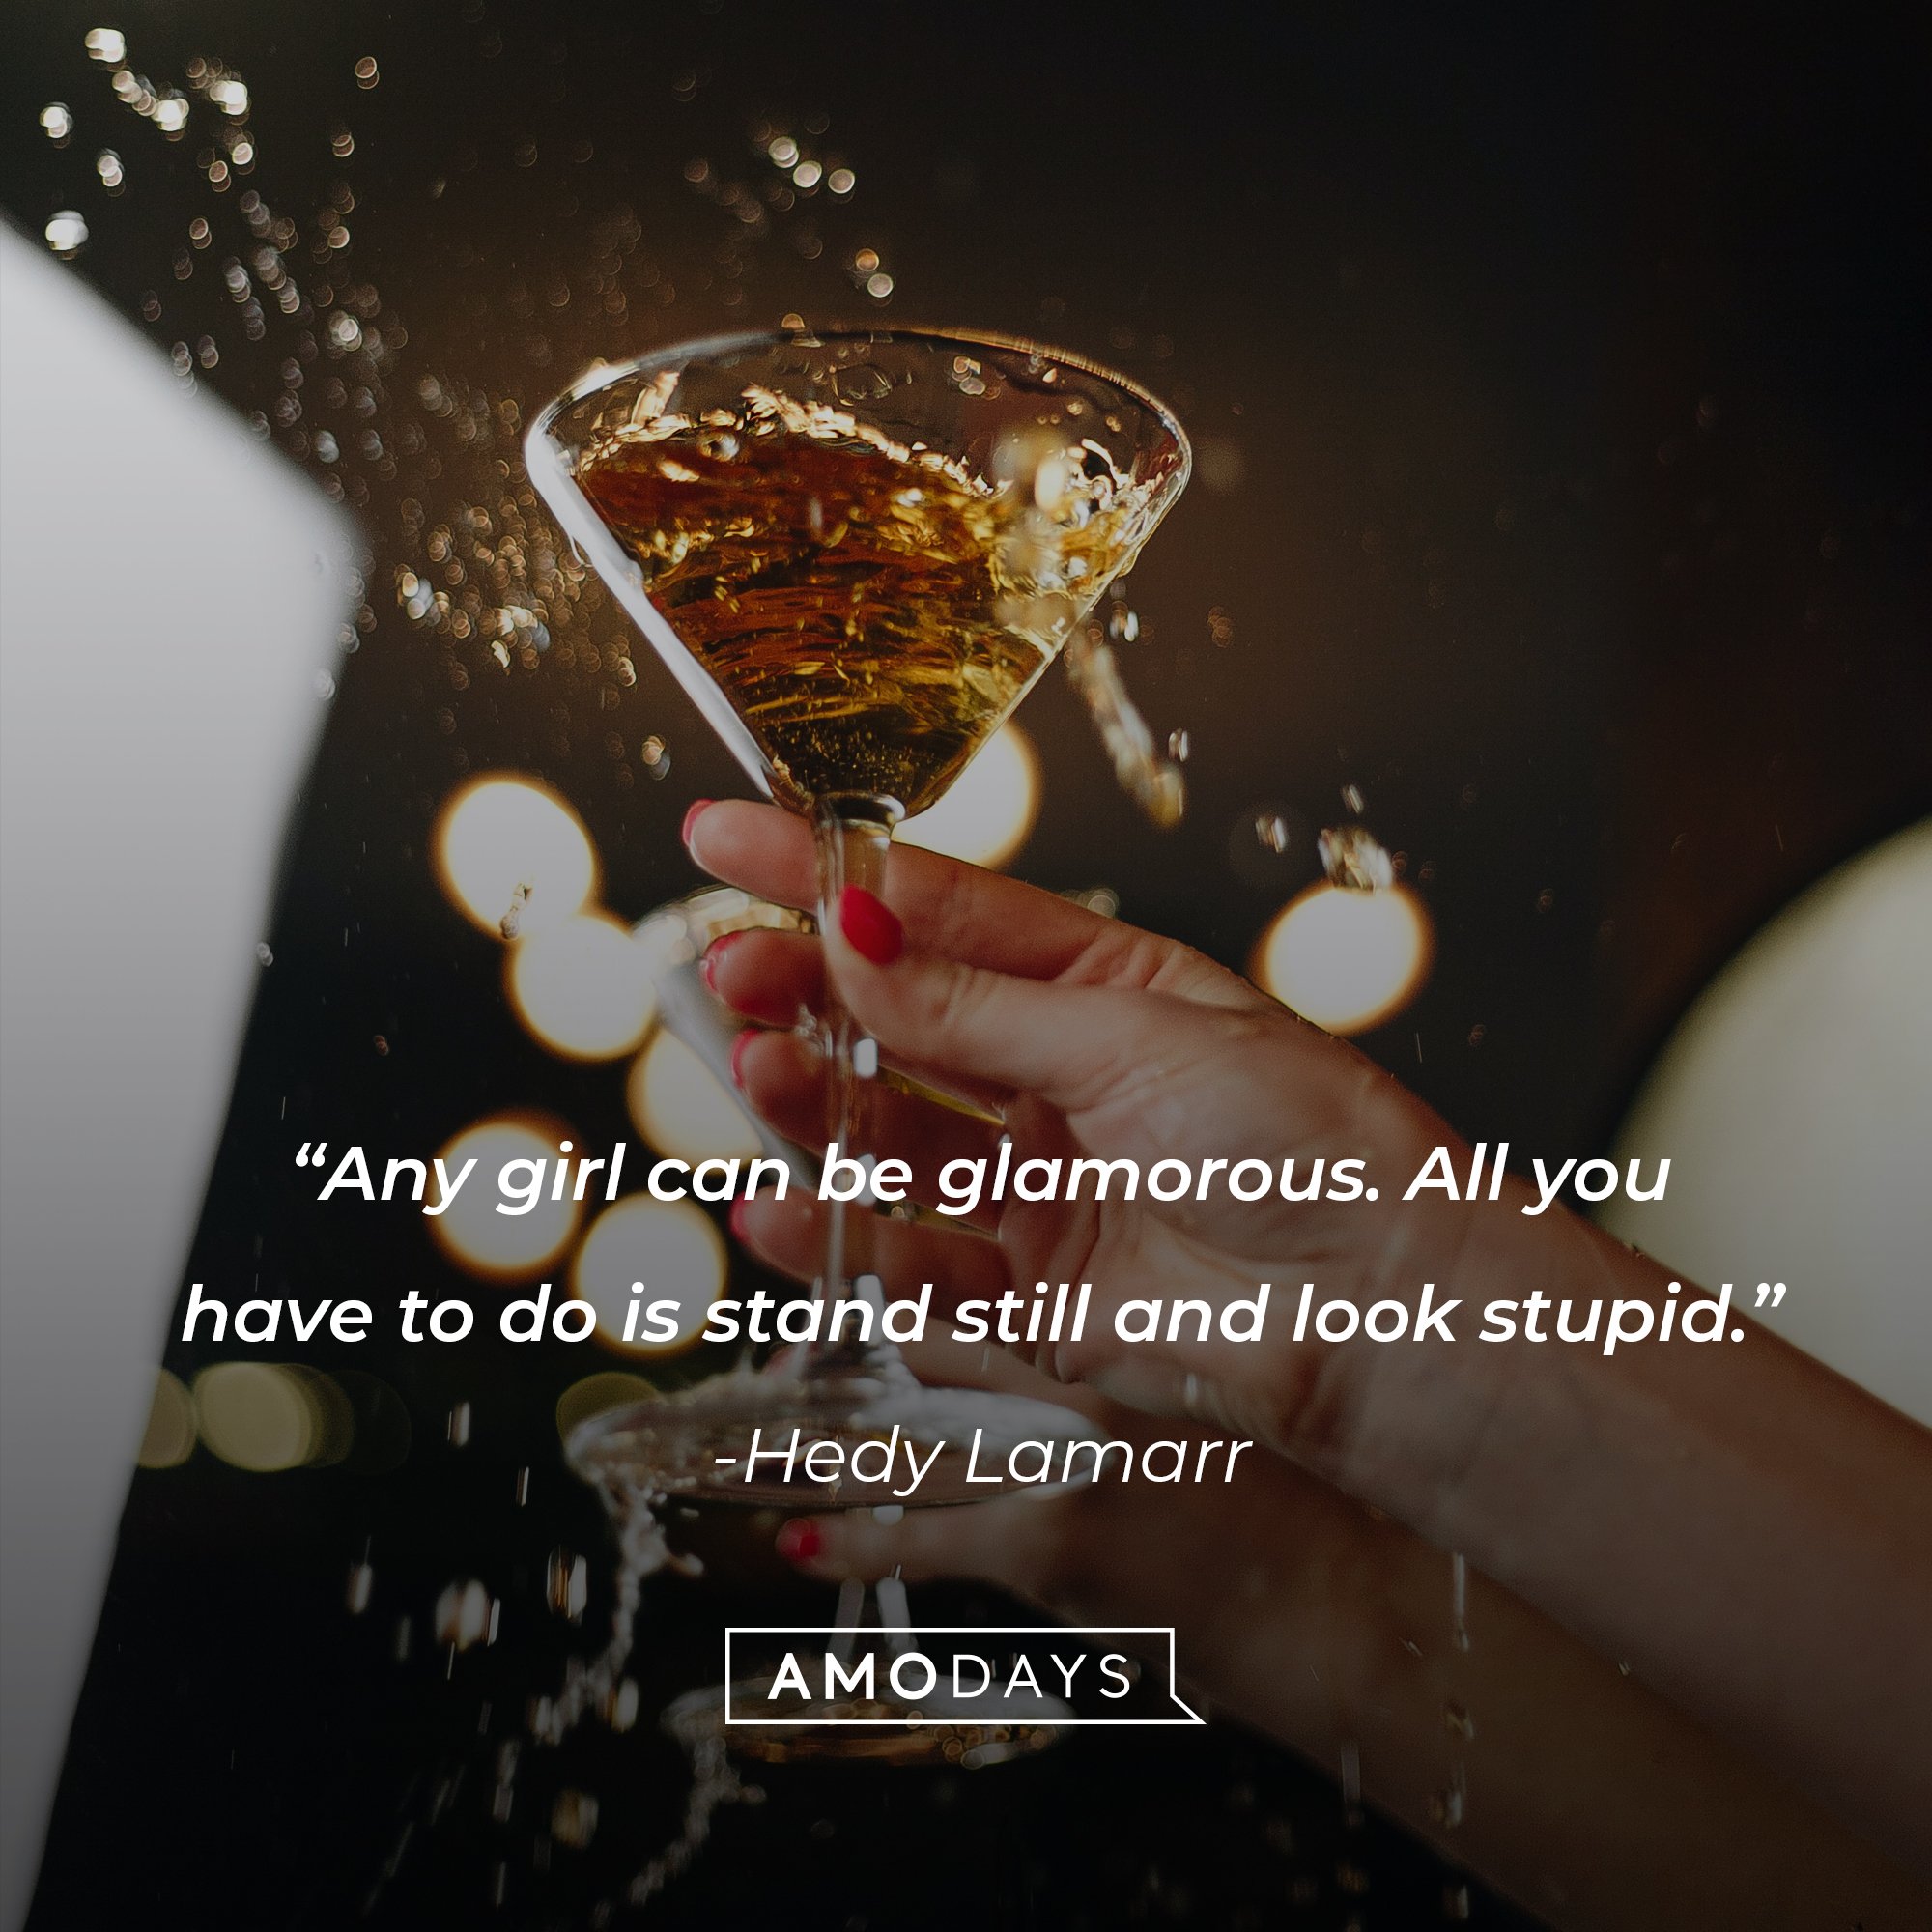 Hedy Lamarr’s quote: "Any girl can be glamorous. All you have to do is stand still and look stupid." | Image: AmoDays